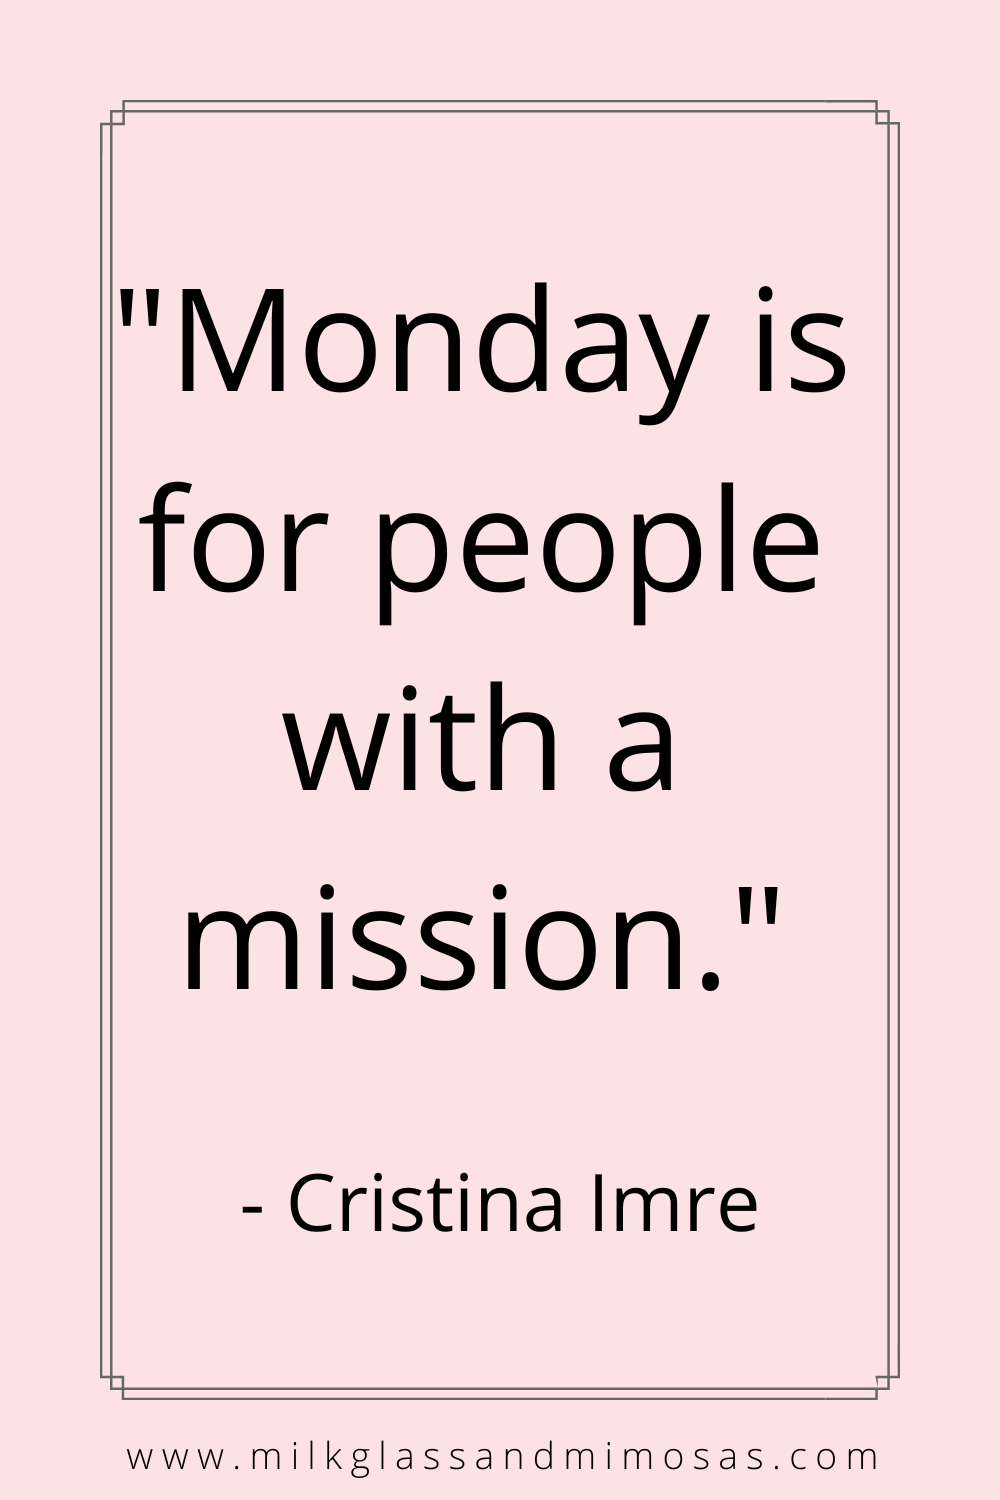 Monday is for people with a mission quote